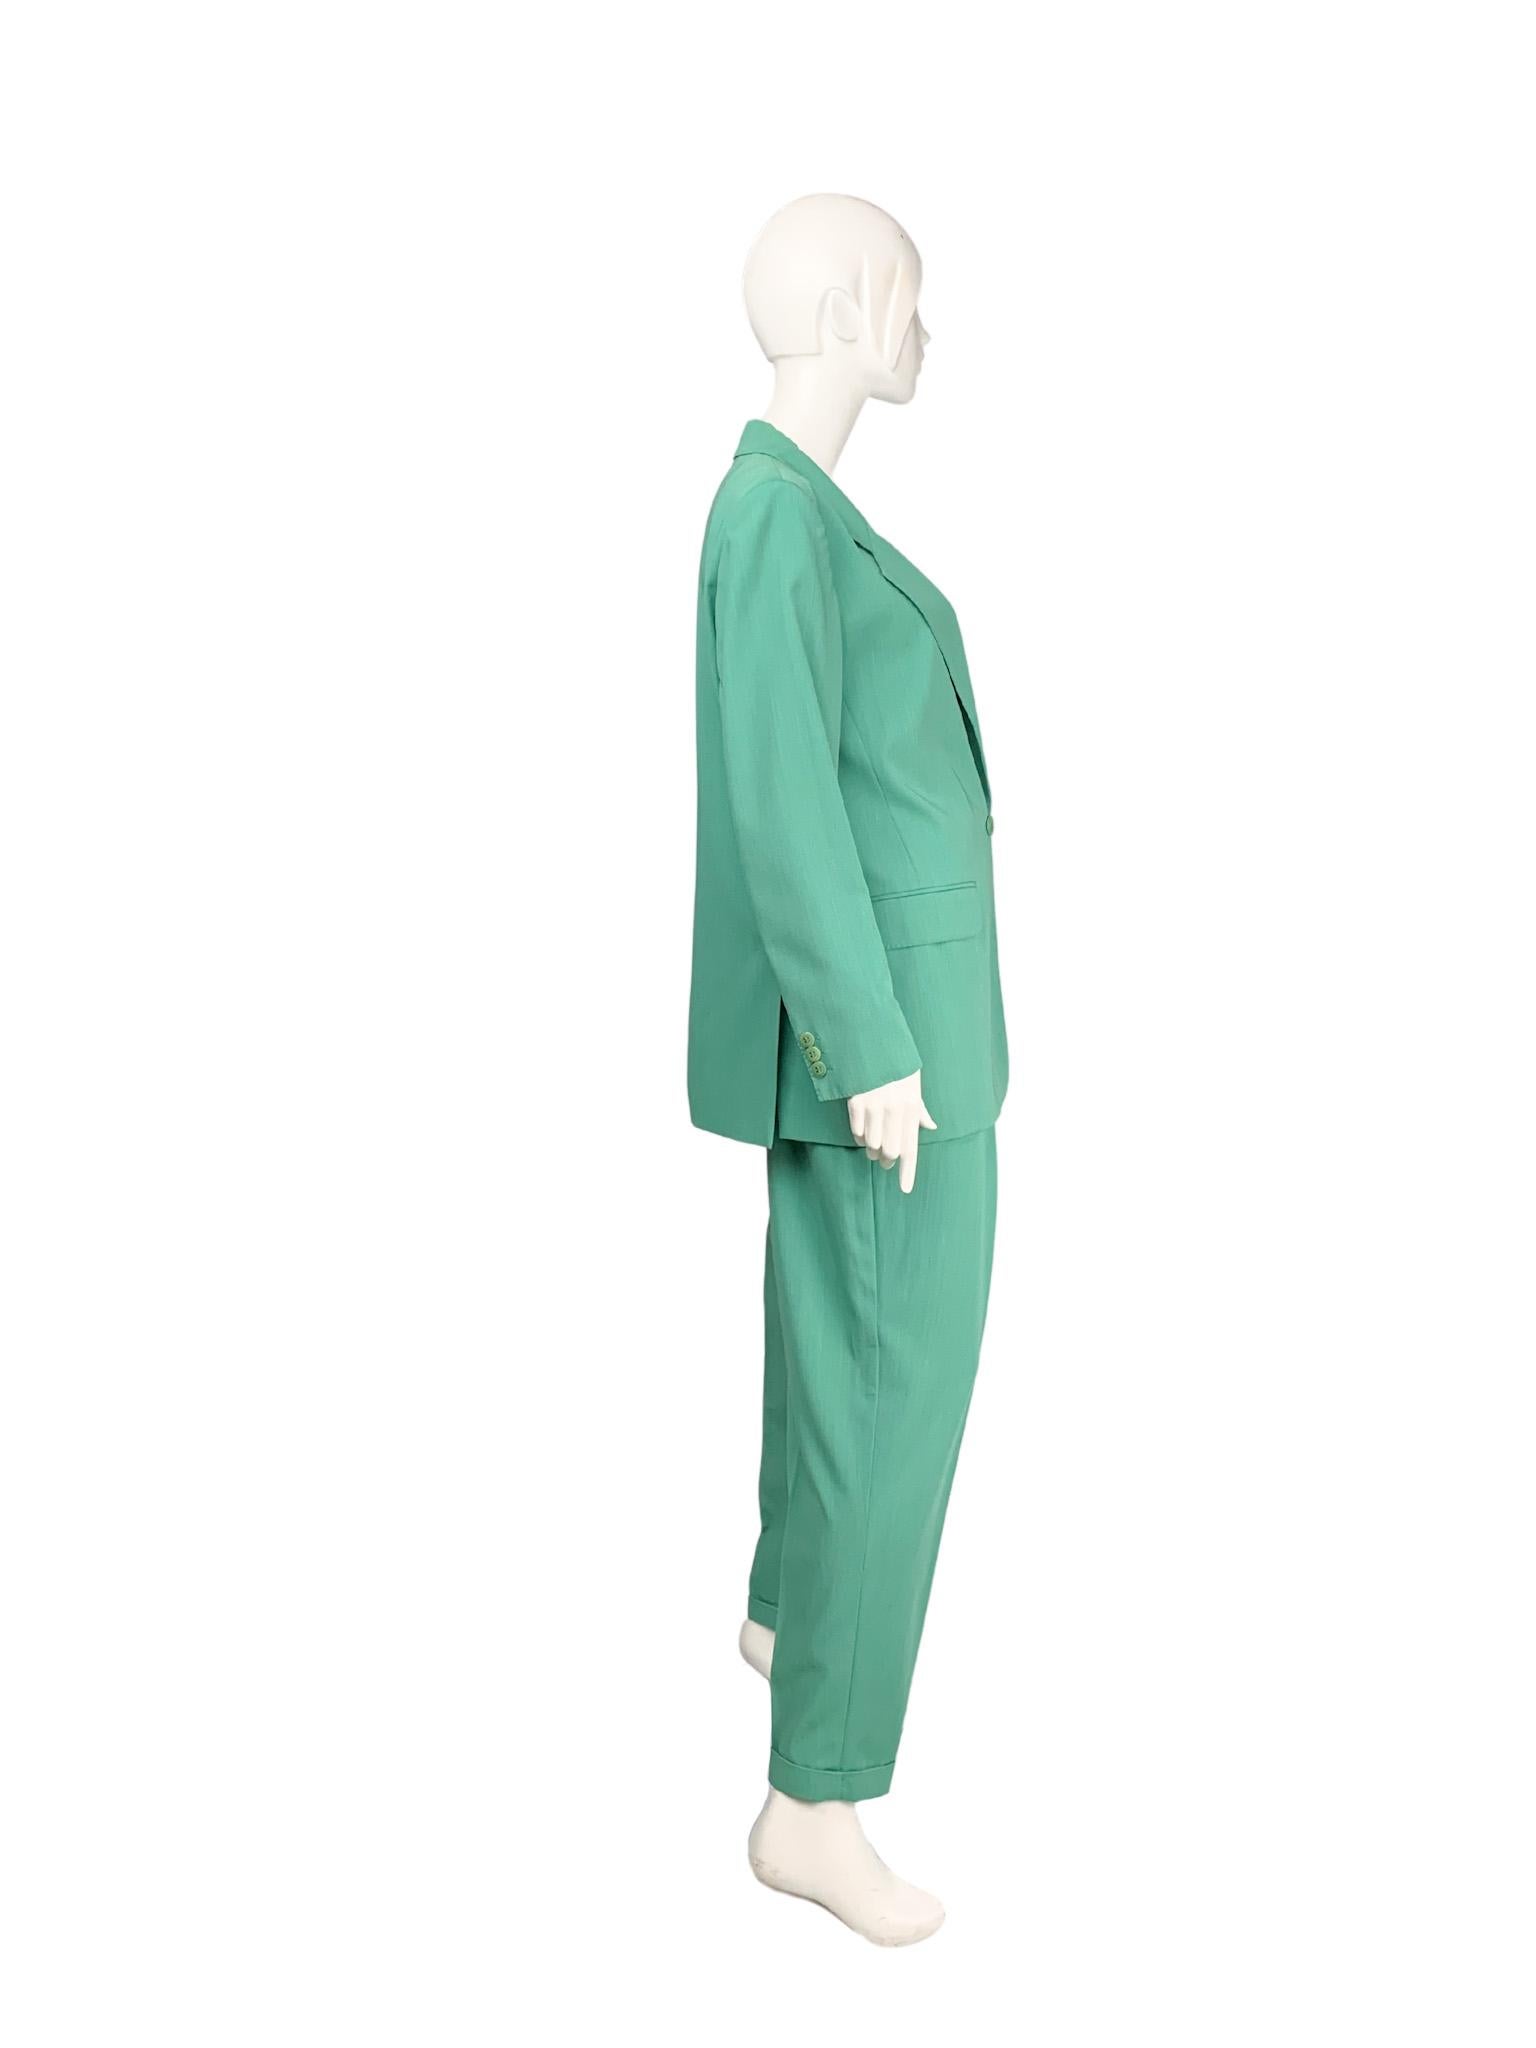 Max Mara women’s trouser suit in vibrant mint green colour. Includes a structured blazer and high-waist pleated pants.

Condition 9/10: excellent pre-owned condition, with no apparent signs of wear.

70% virgin wool, 30% viscose; soft, lightweight,